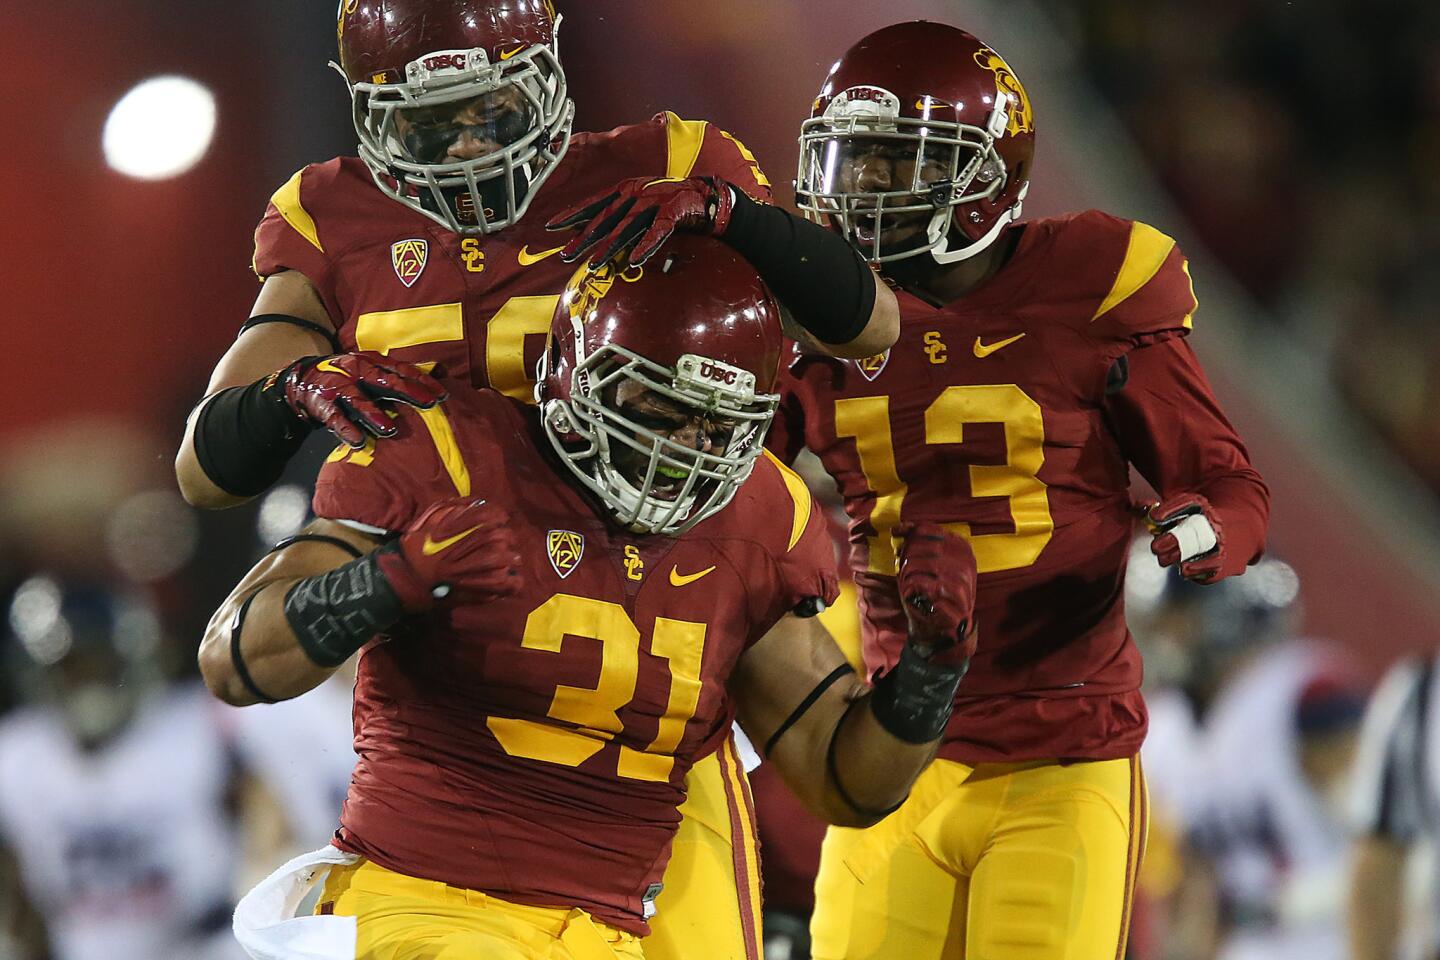 USC Now morning report: Trojans perfect against Colorado